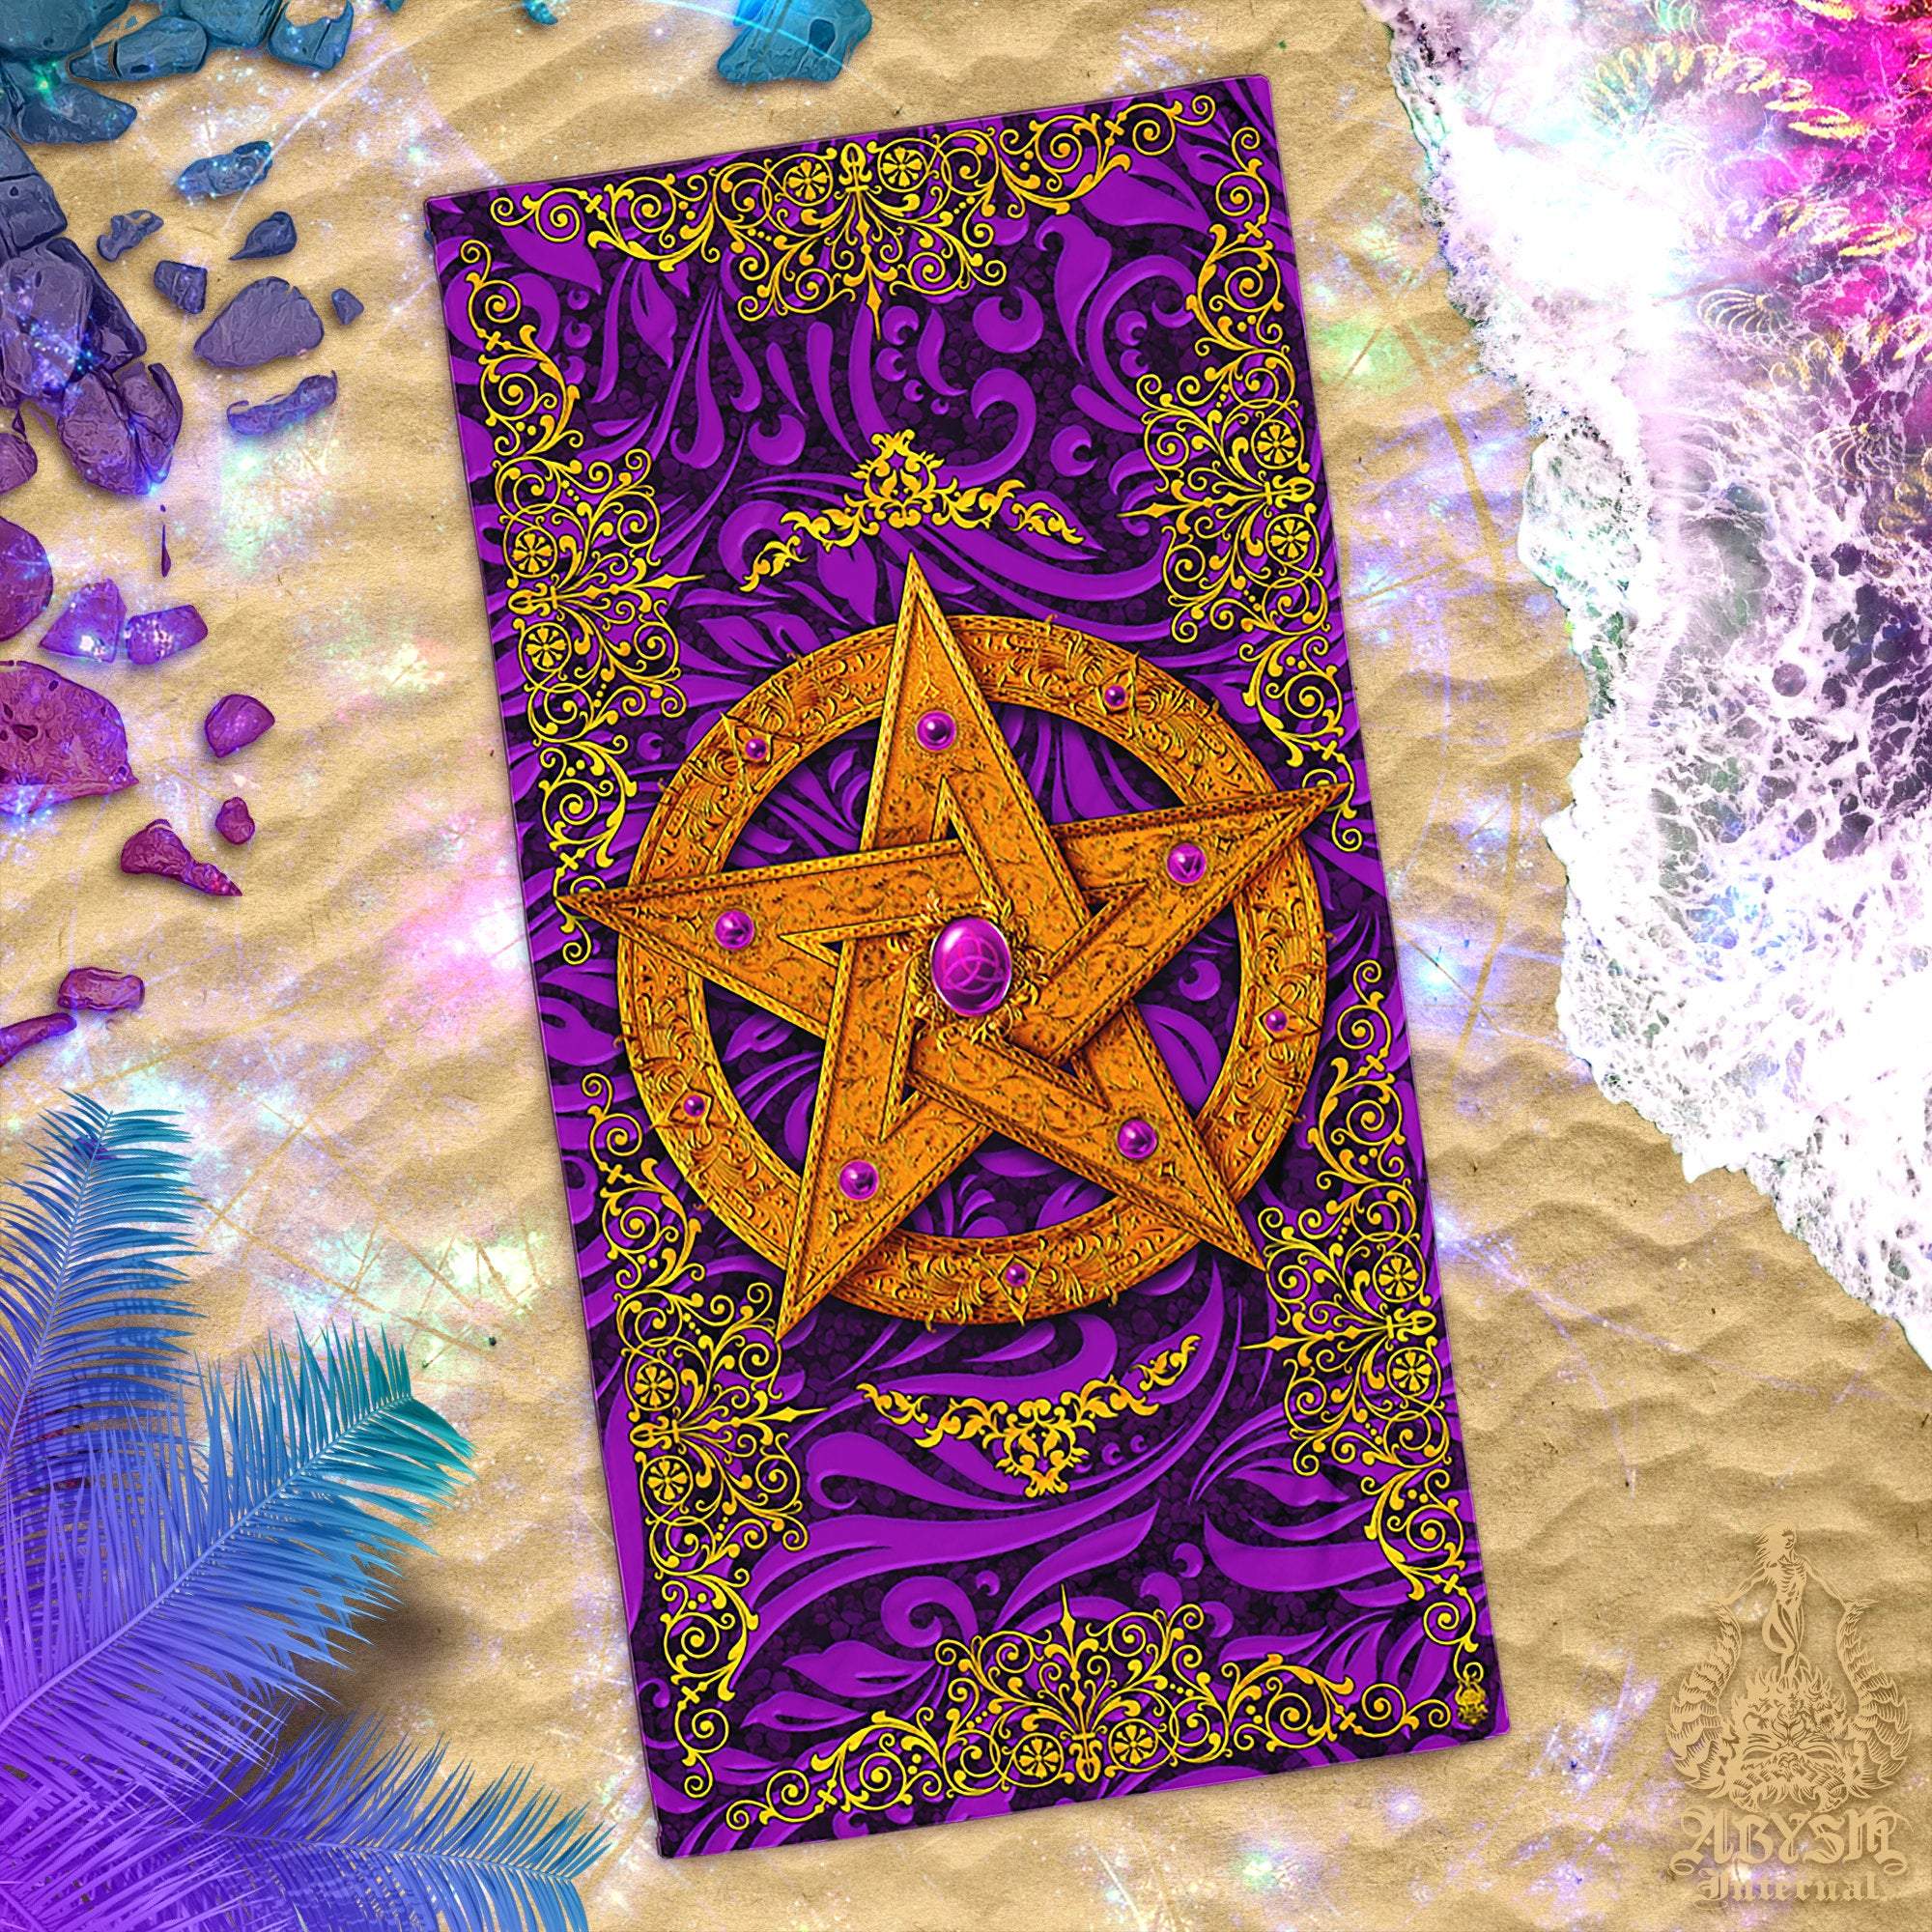 Wicca Beach Towel, Pentacle Witch and Pagan, - Abysm Internal